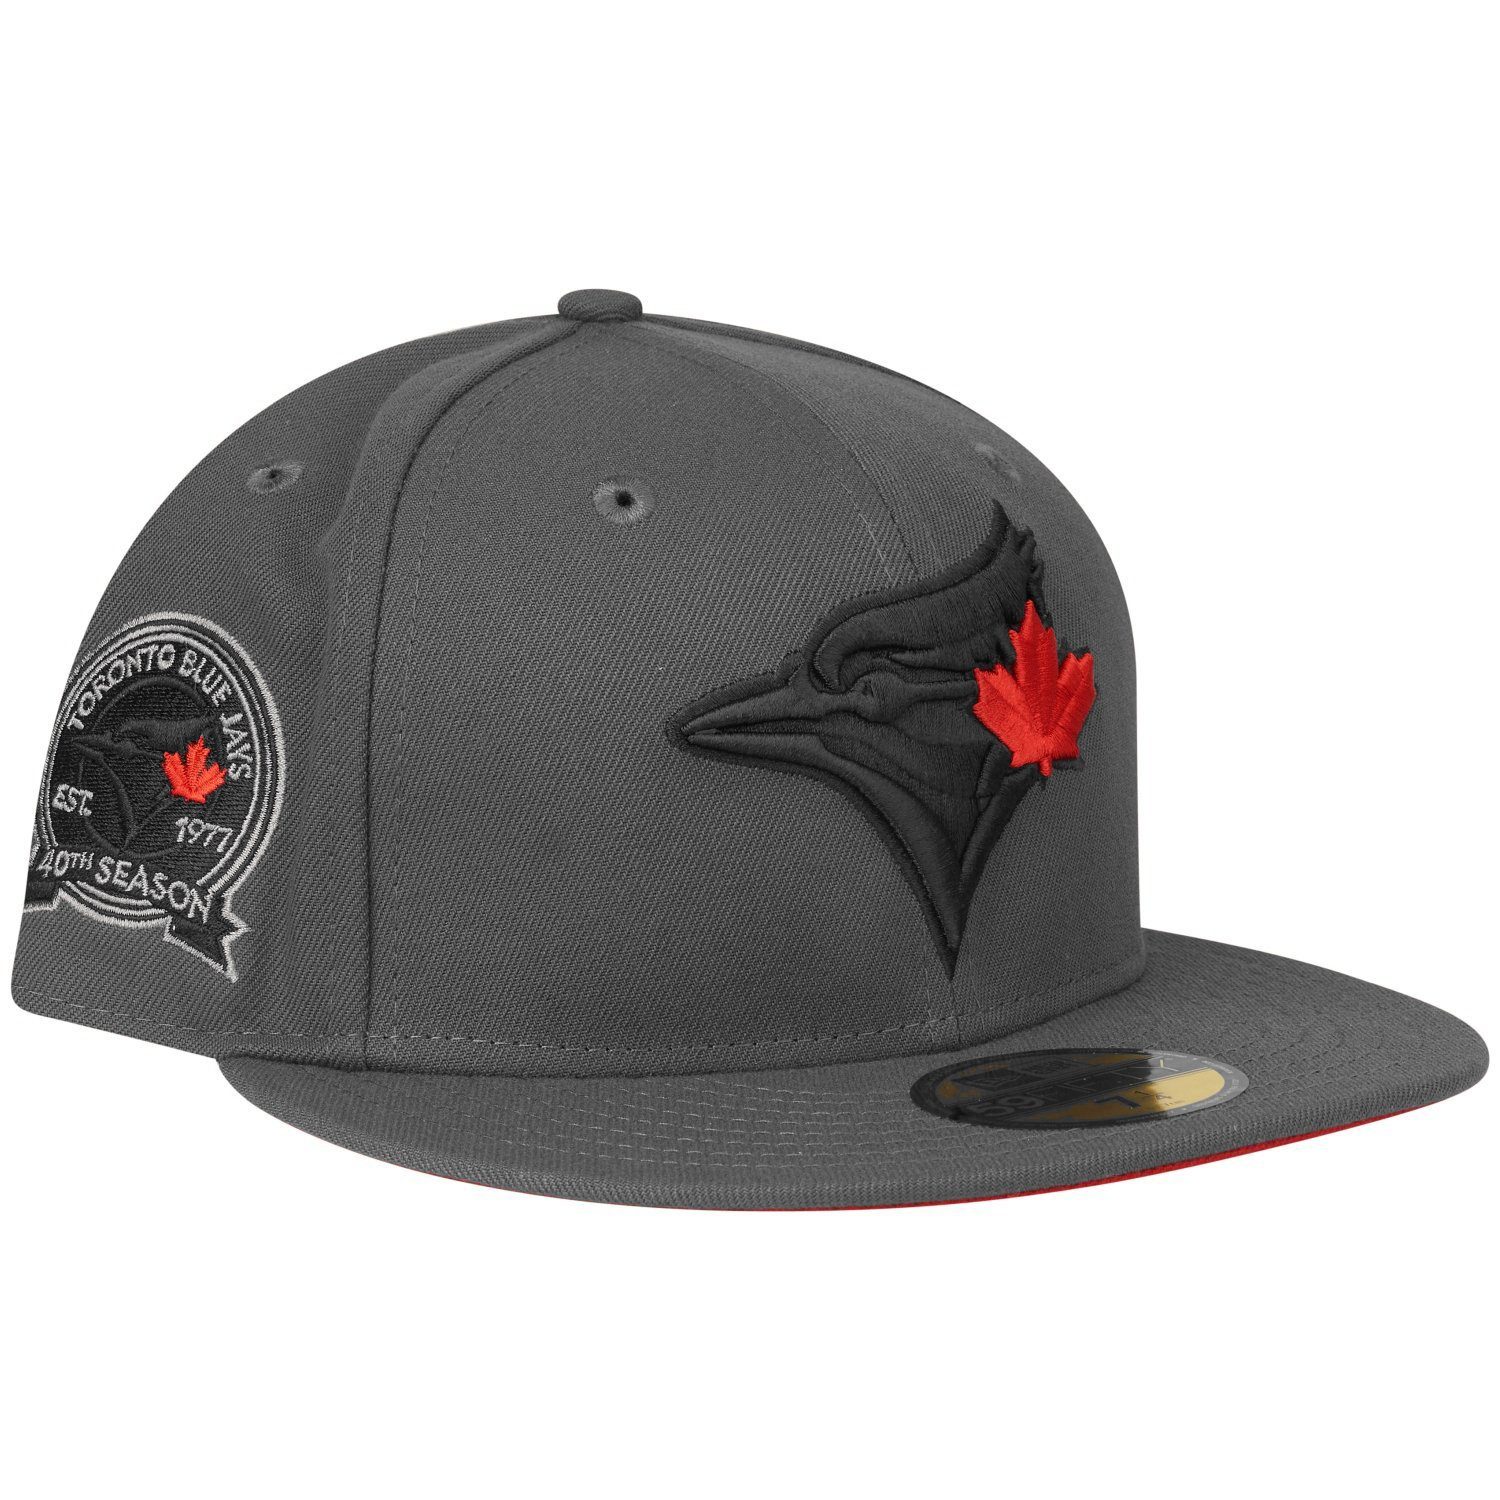 New Era Fitted Cap 59Fifty Toronto MLB Jays 40th